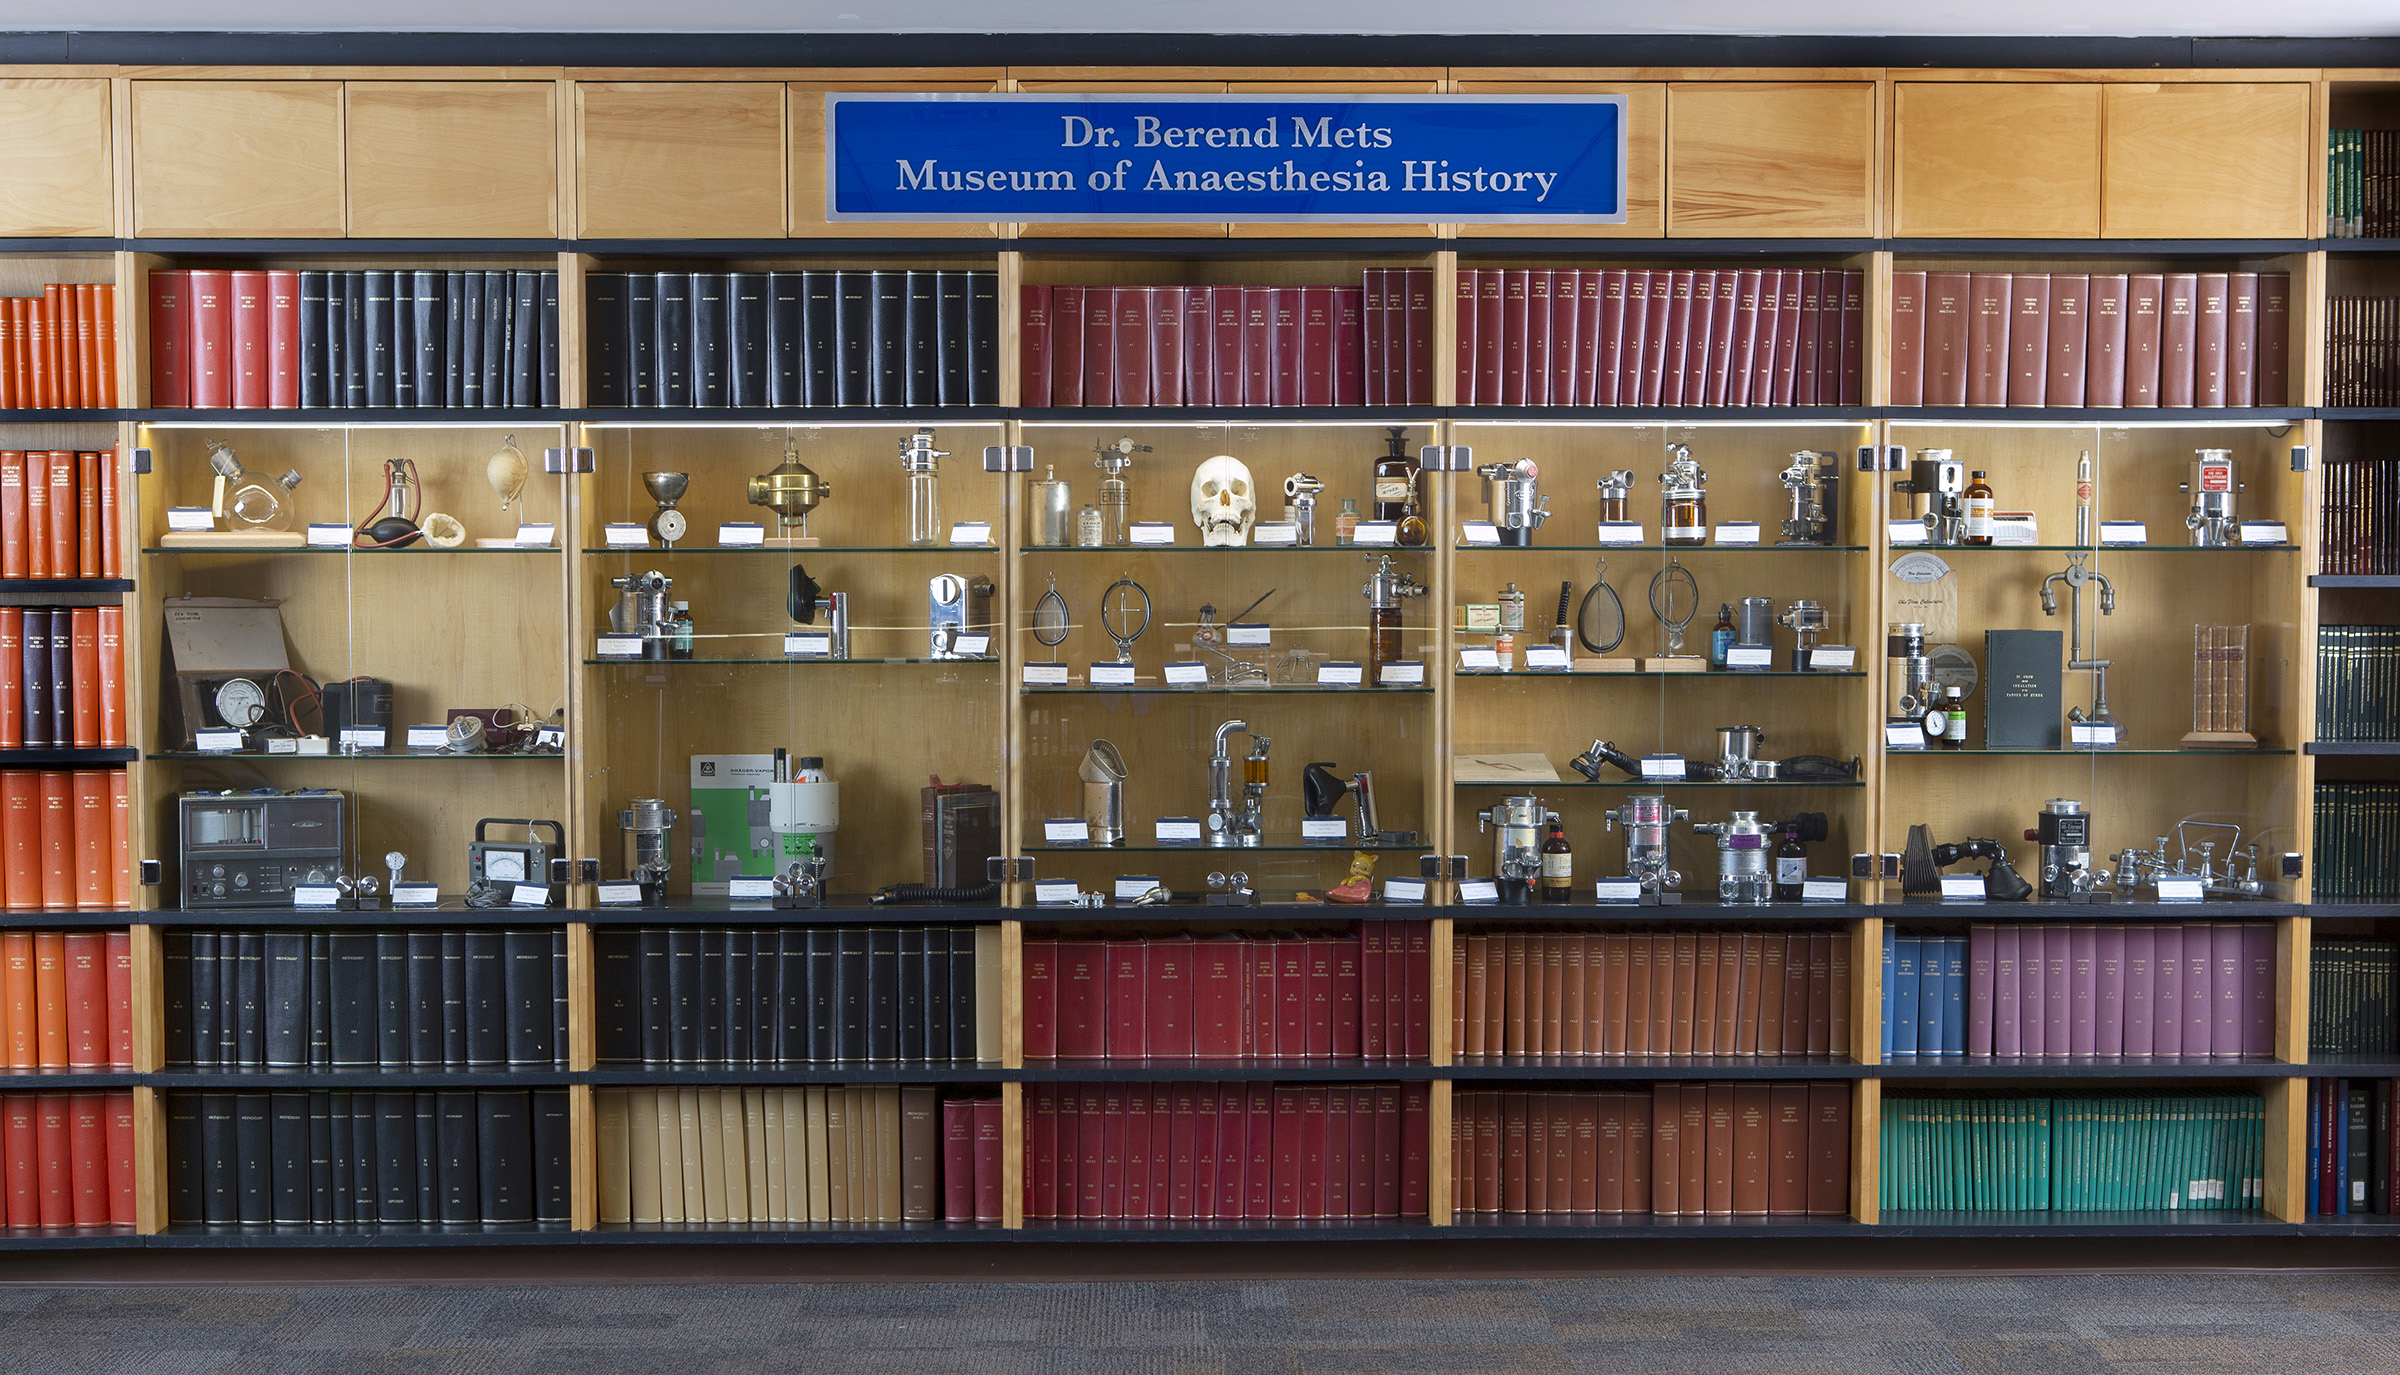 Display of shelves containing historical anesthesiology items and old books with Dr. Berend Mets Museum of Anaesthesia History above it.